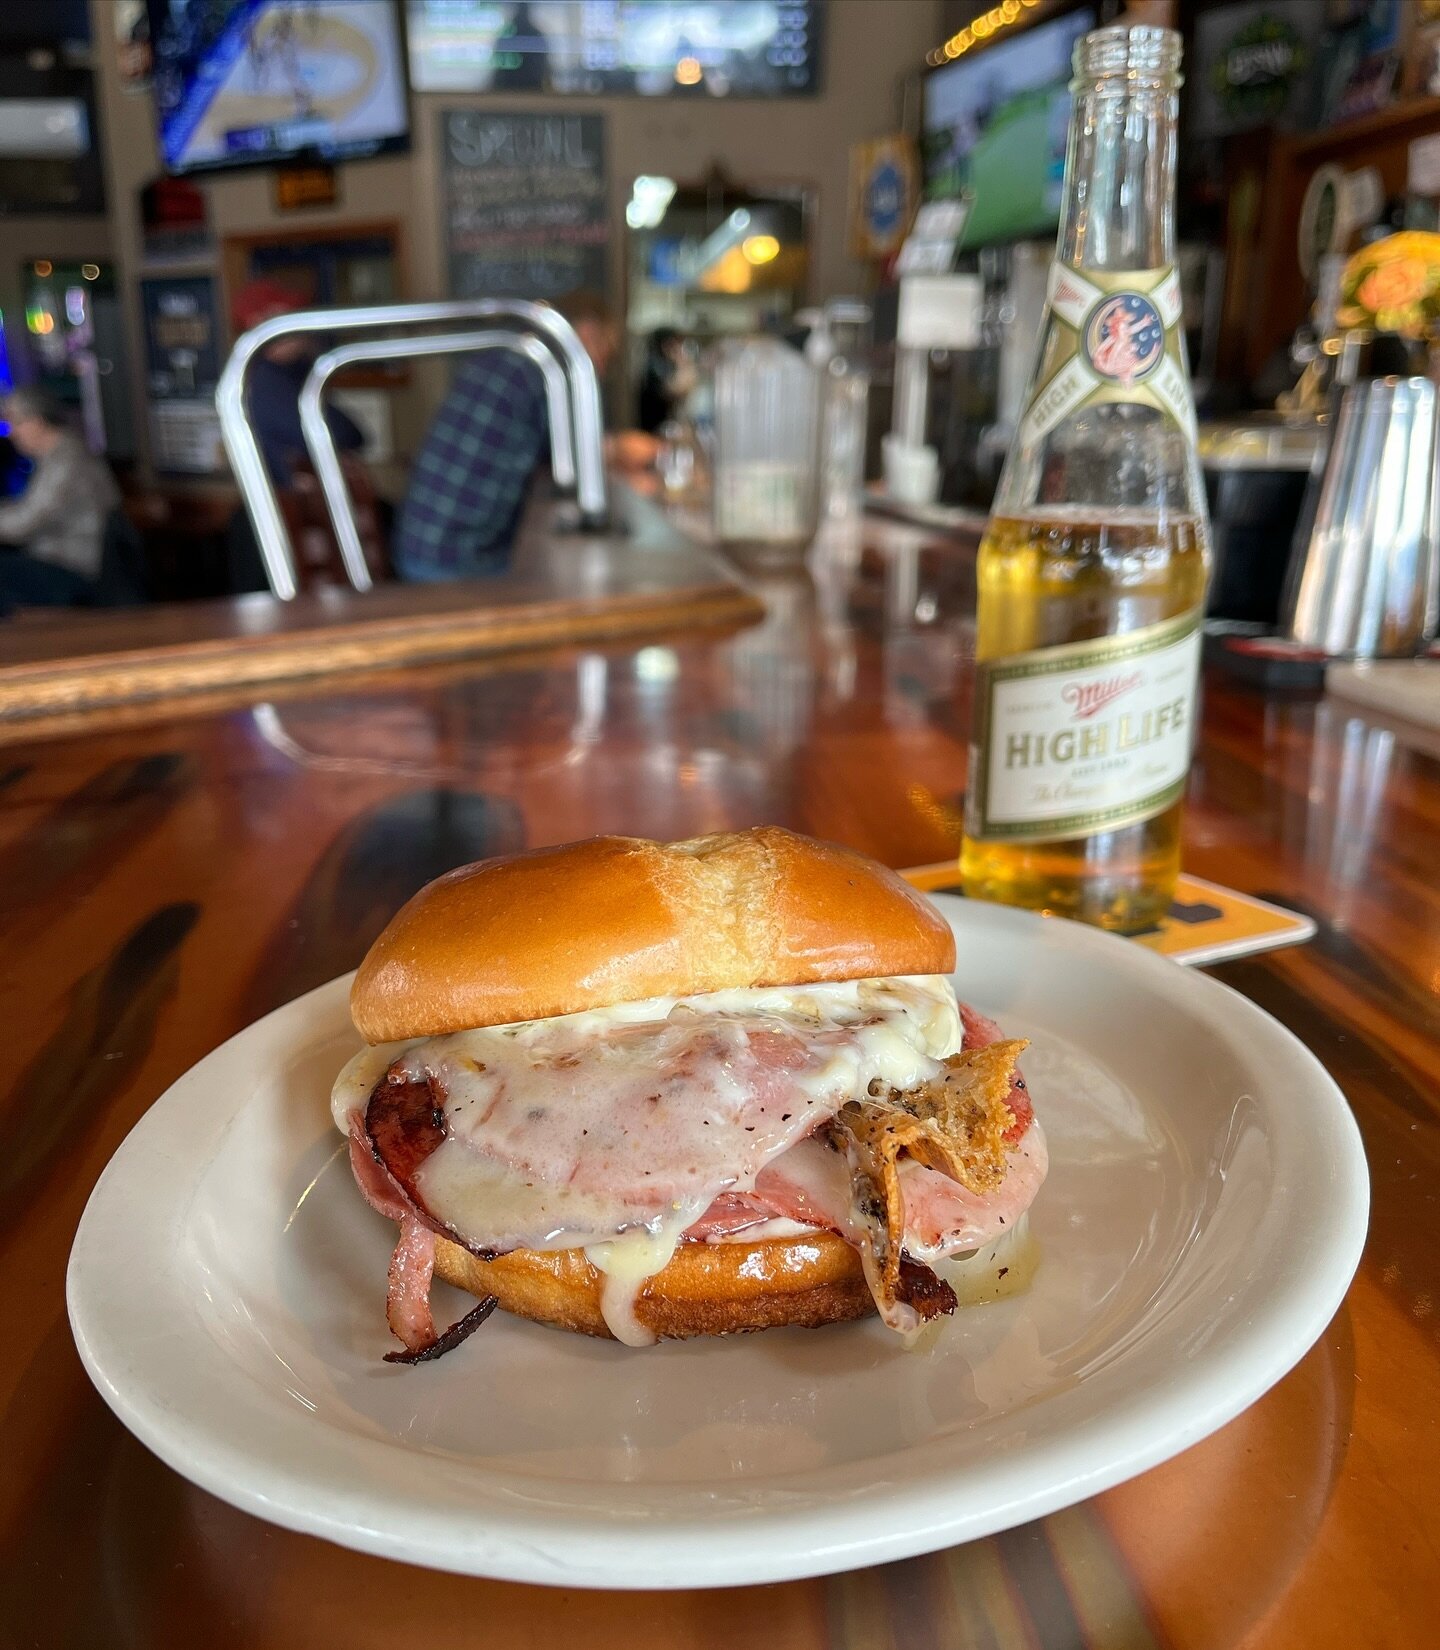 &ldquo;Good food is very often, even most often, simple food.&rdquo; -Anthony Bourdain

We&rsquo;re rolling out one of Bourdain&rsquo;s favorites this week: Mortadella, melty provolone, dijon, mayo, on a potato roll. Five simple ingredients done righ